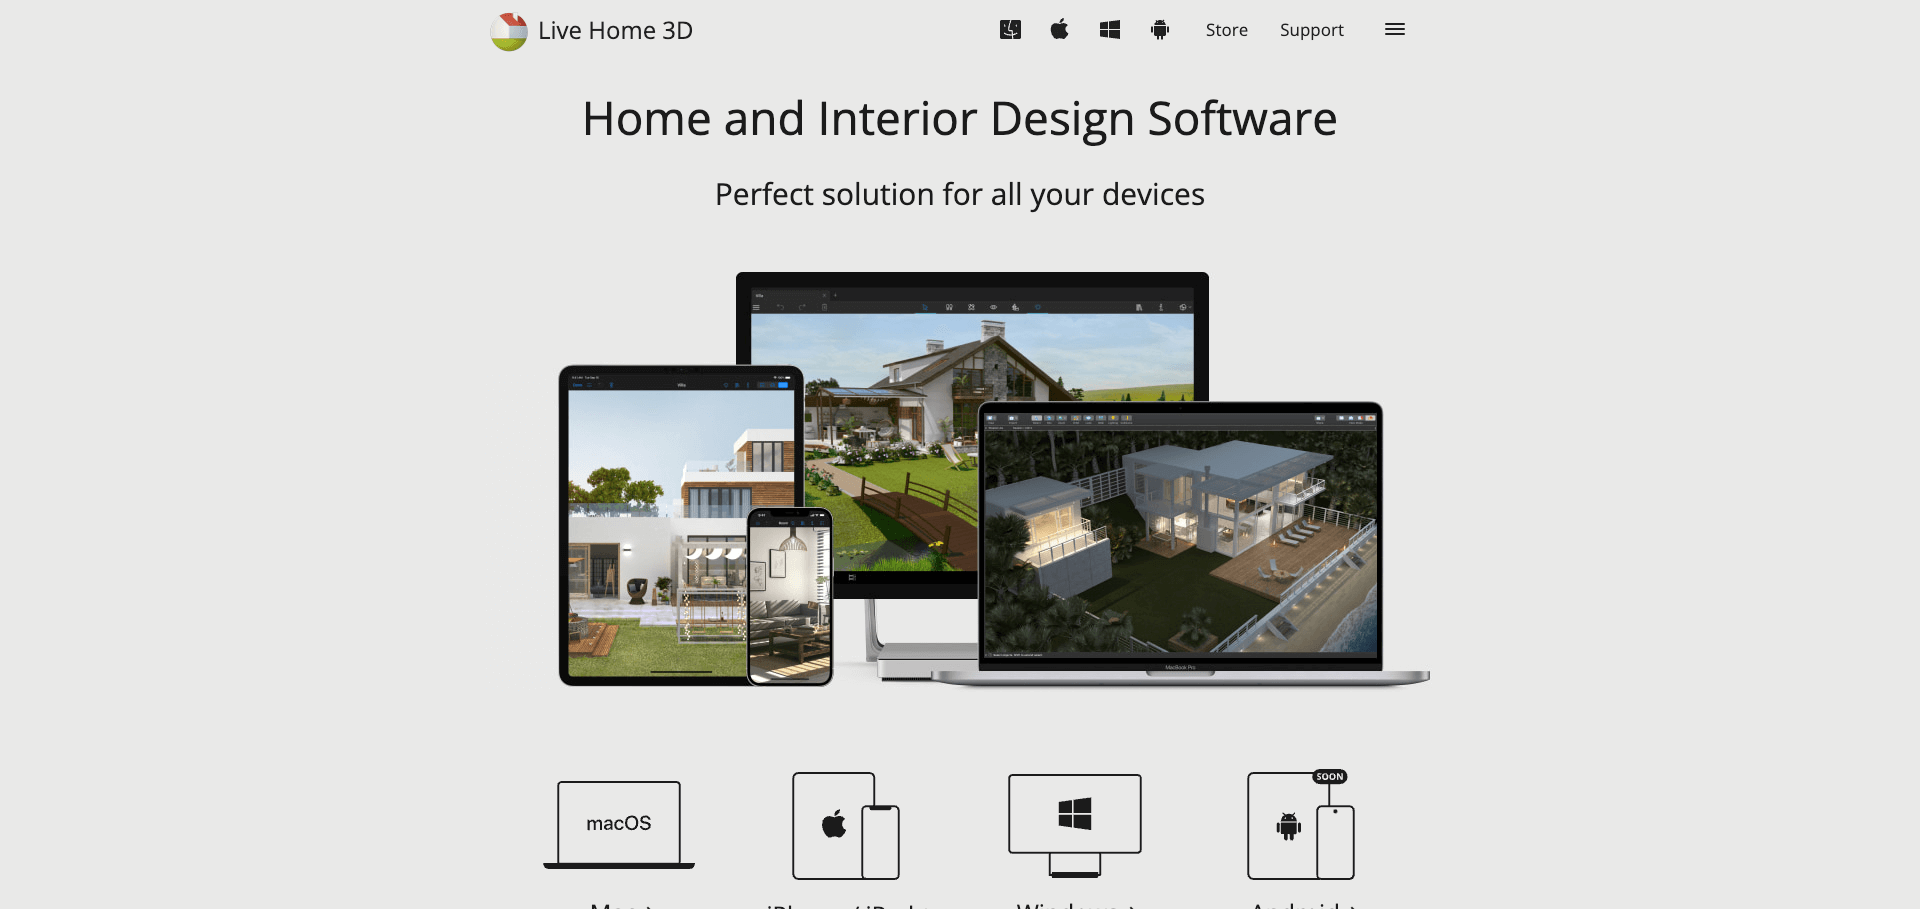 Live Home 3D Projection: Benefit from projecting 3D models onto any surface with Live Home 3D Projection tools.